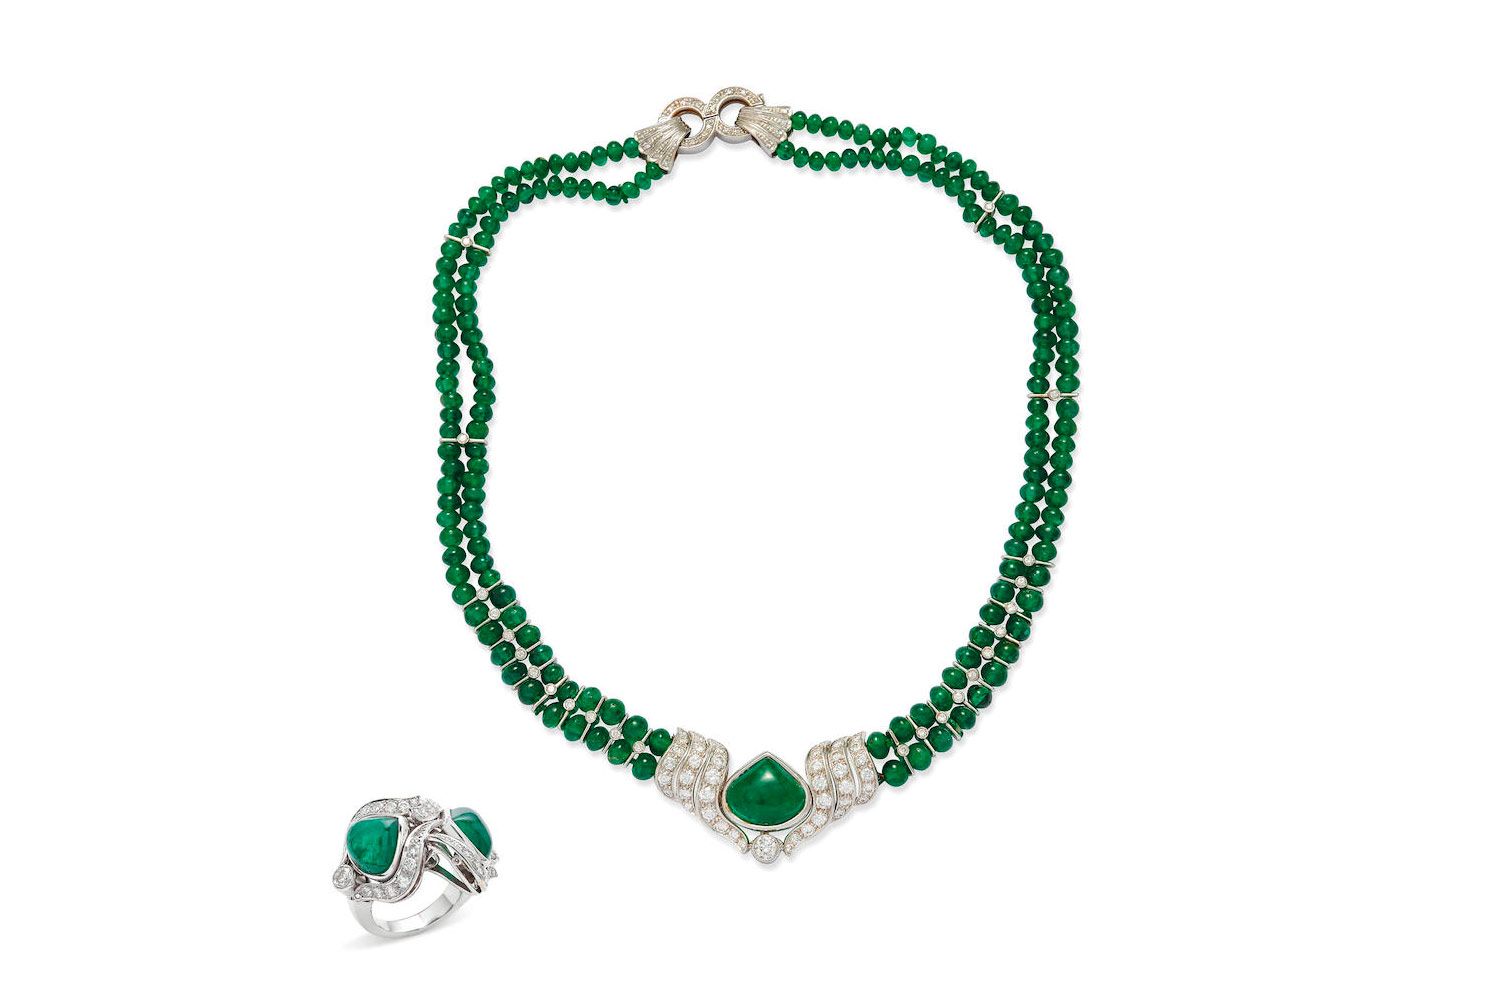 An emerald and diamond demi-parure set with cabochon emeralds, emerald beads and brilliant and single-cut diamonds from the collection of an Italian family, to be sold by Bonhams Paris in November 2021